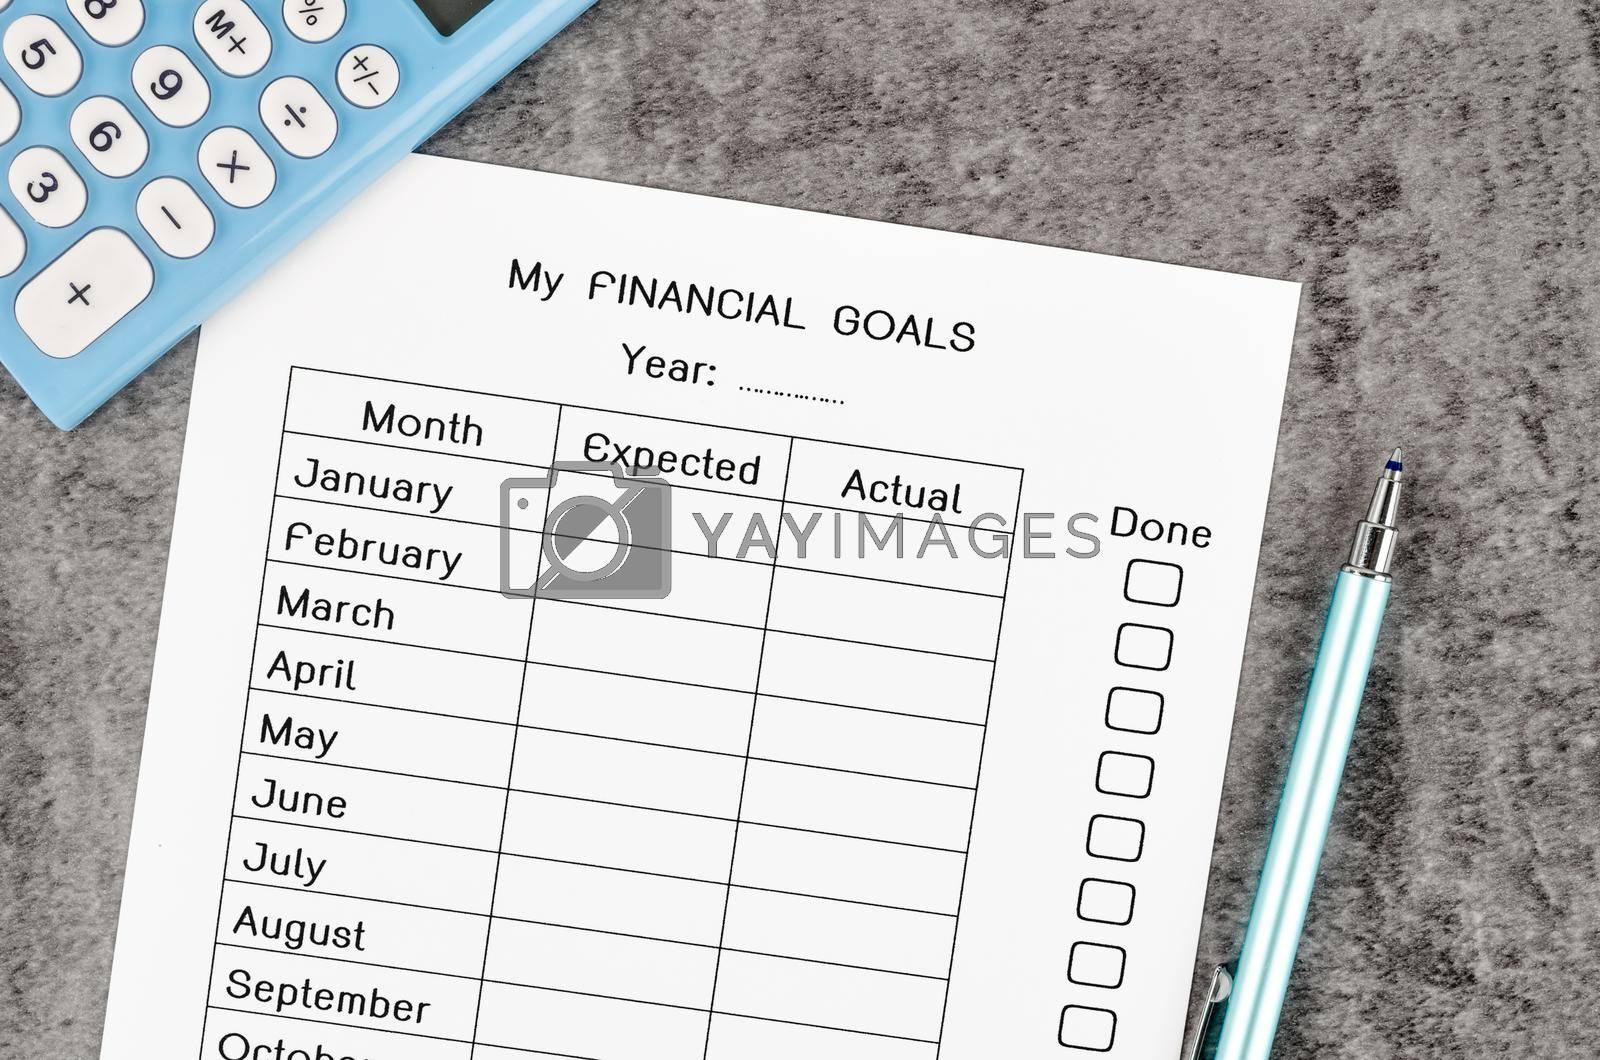 My planning financial goals form and pen with calculator on wooden background.